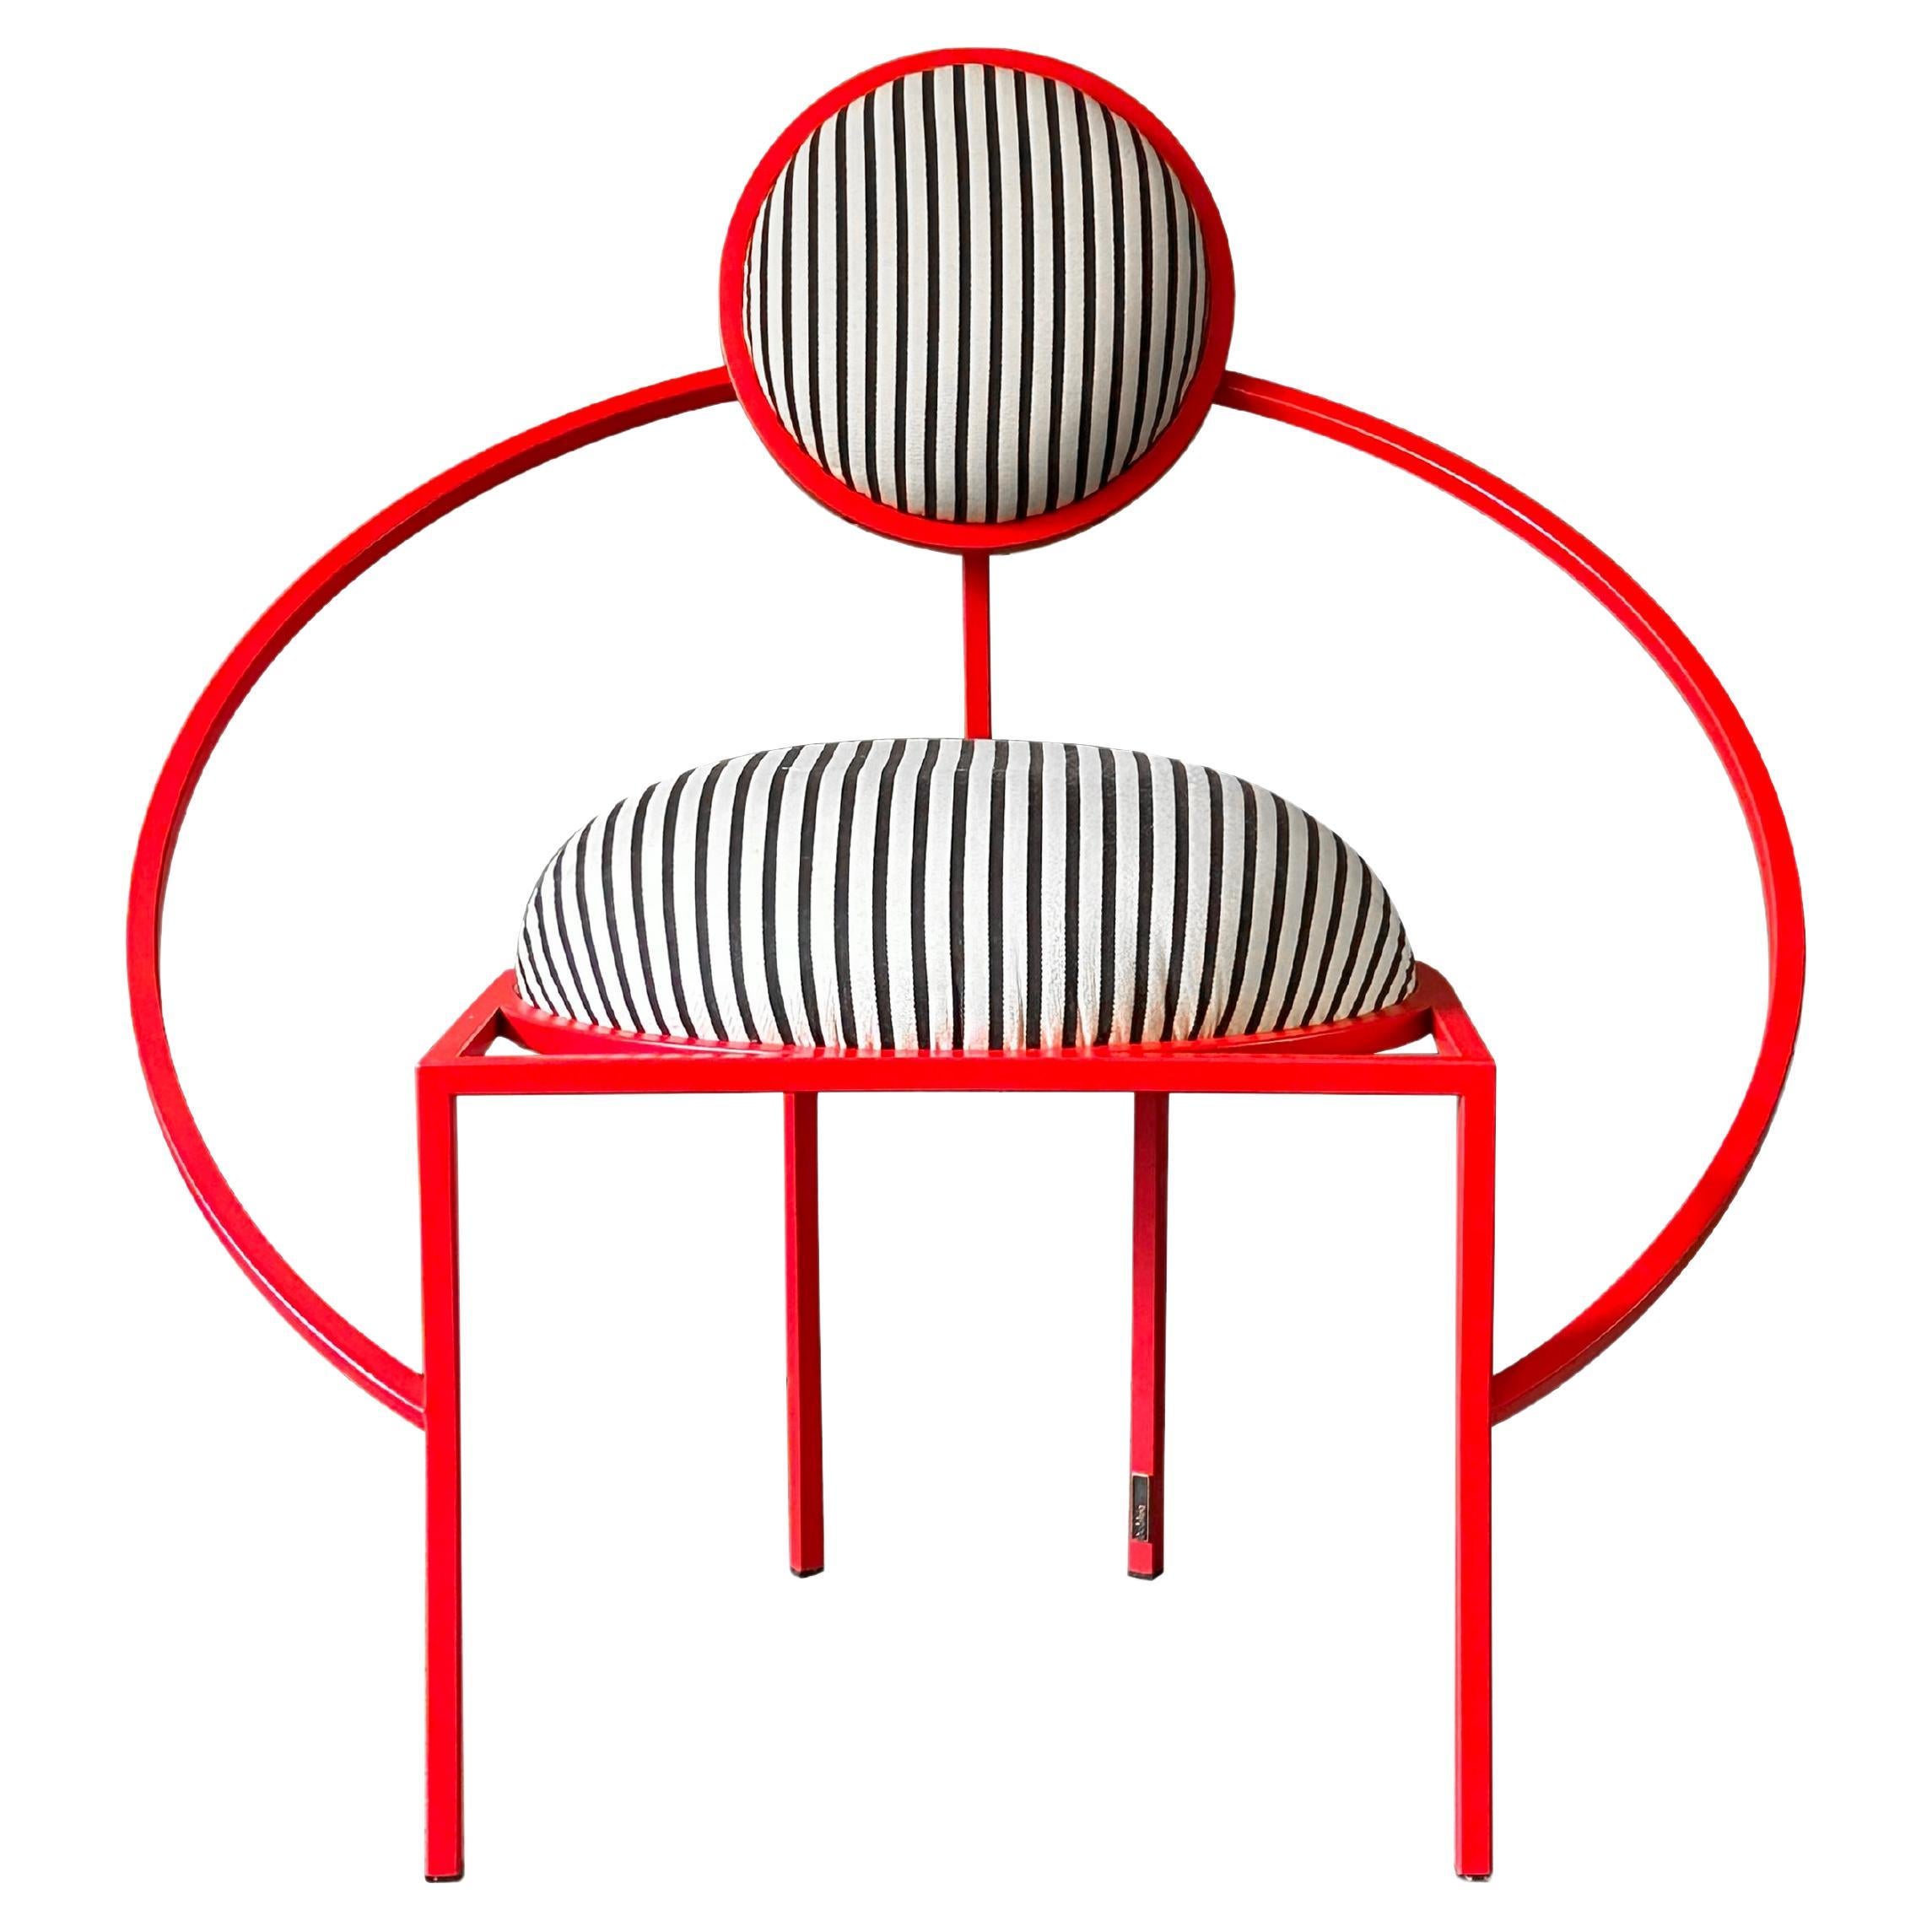 Orbit Chair, Outdoor , Red Powder-Coated Steel and Stripe Fabric by Lara Bohinc